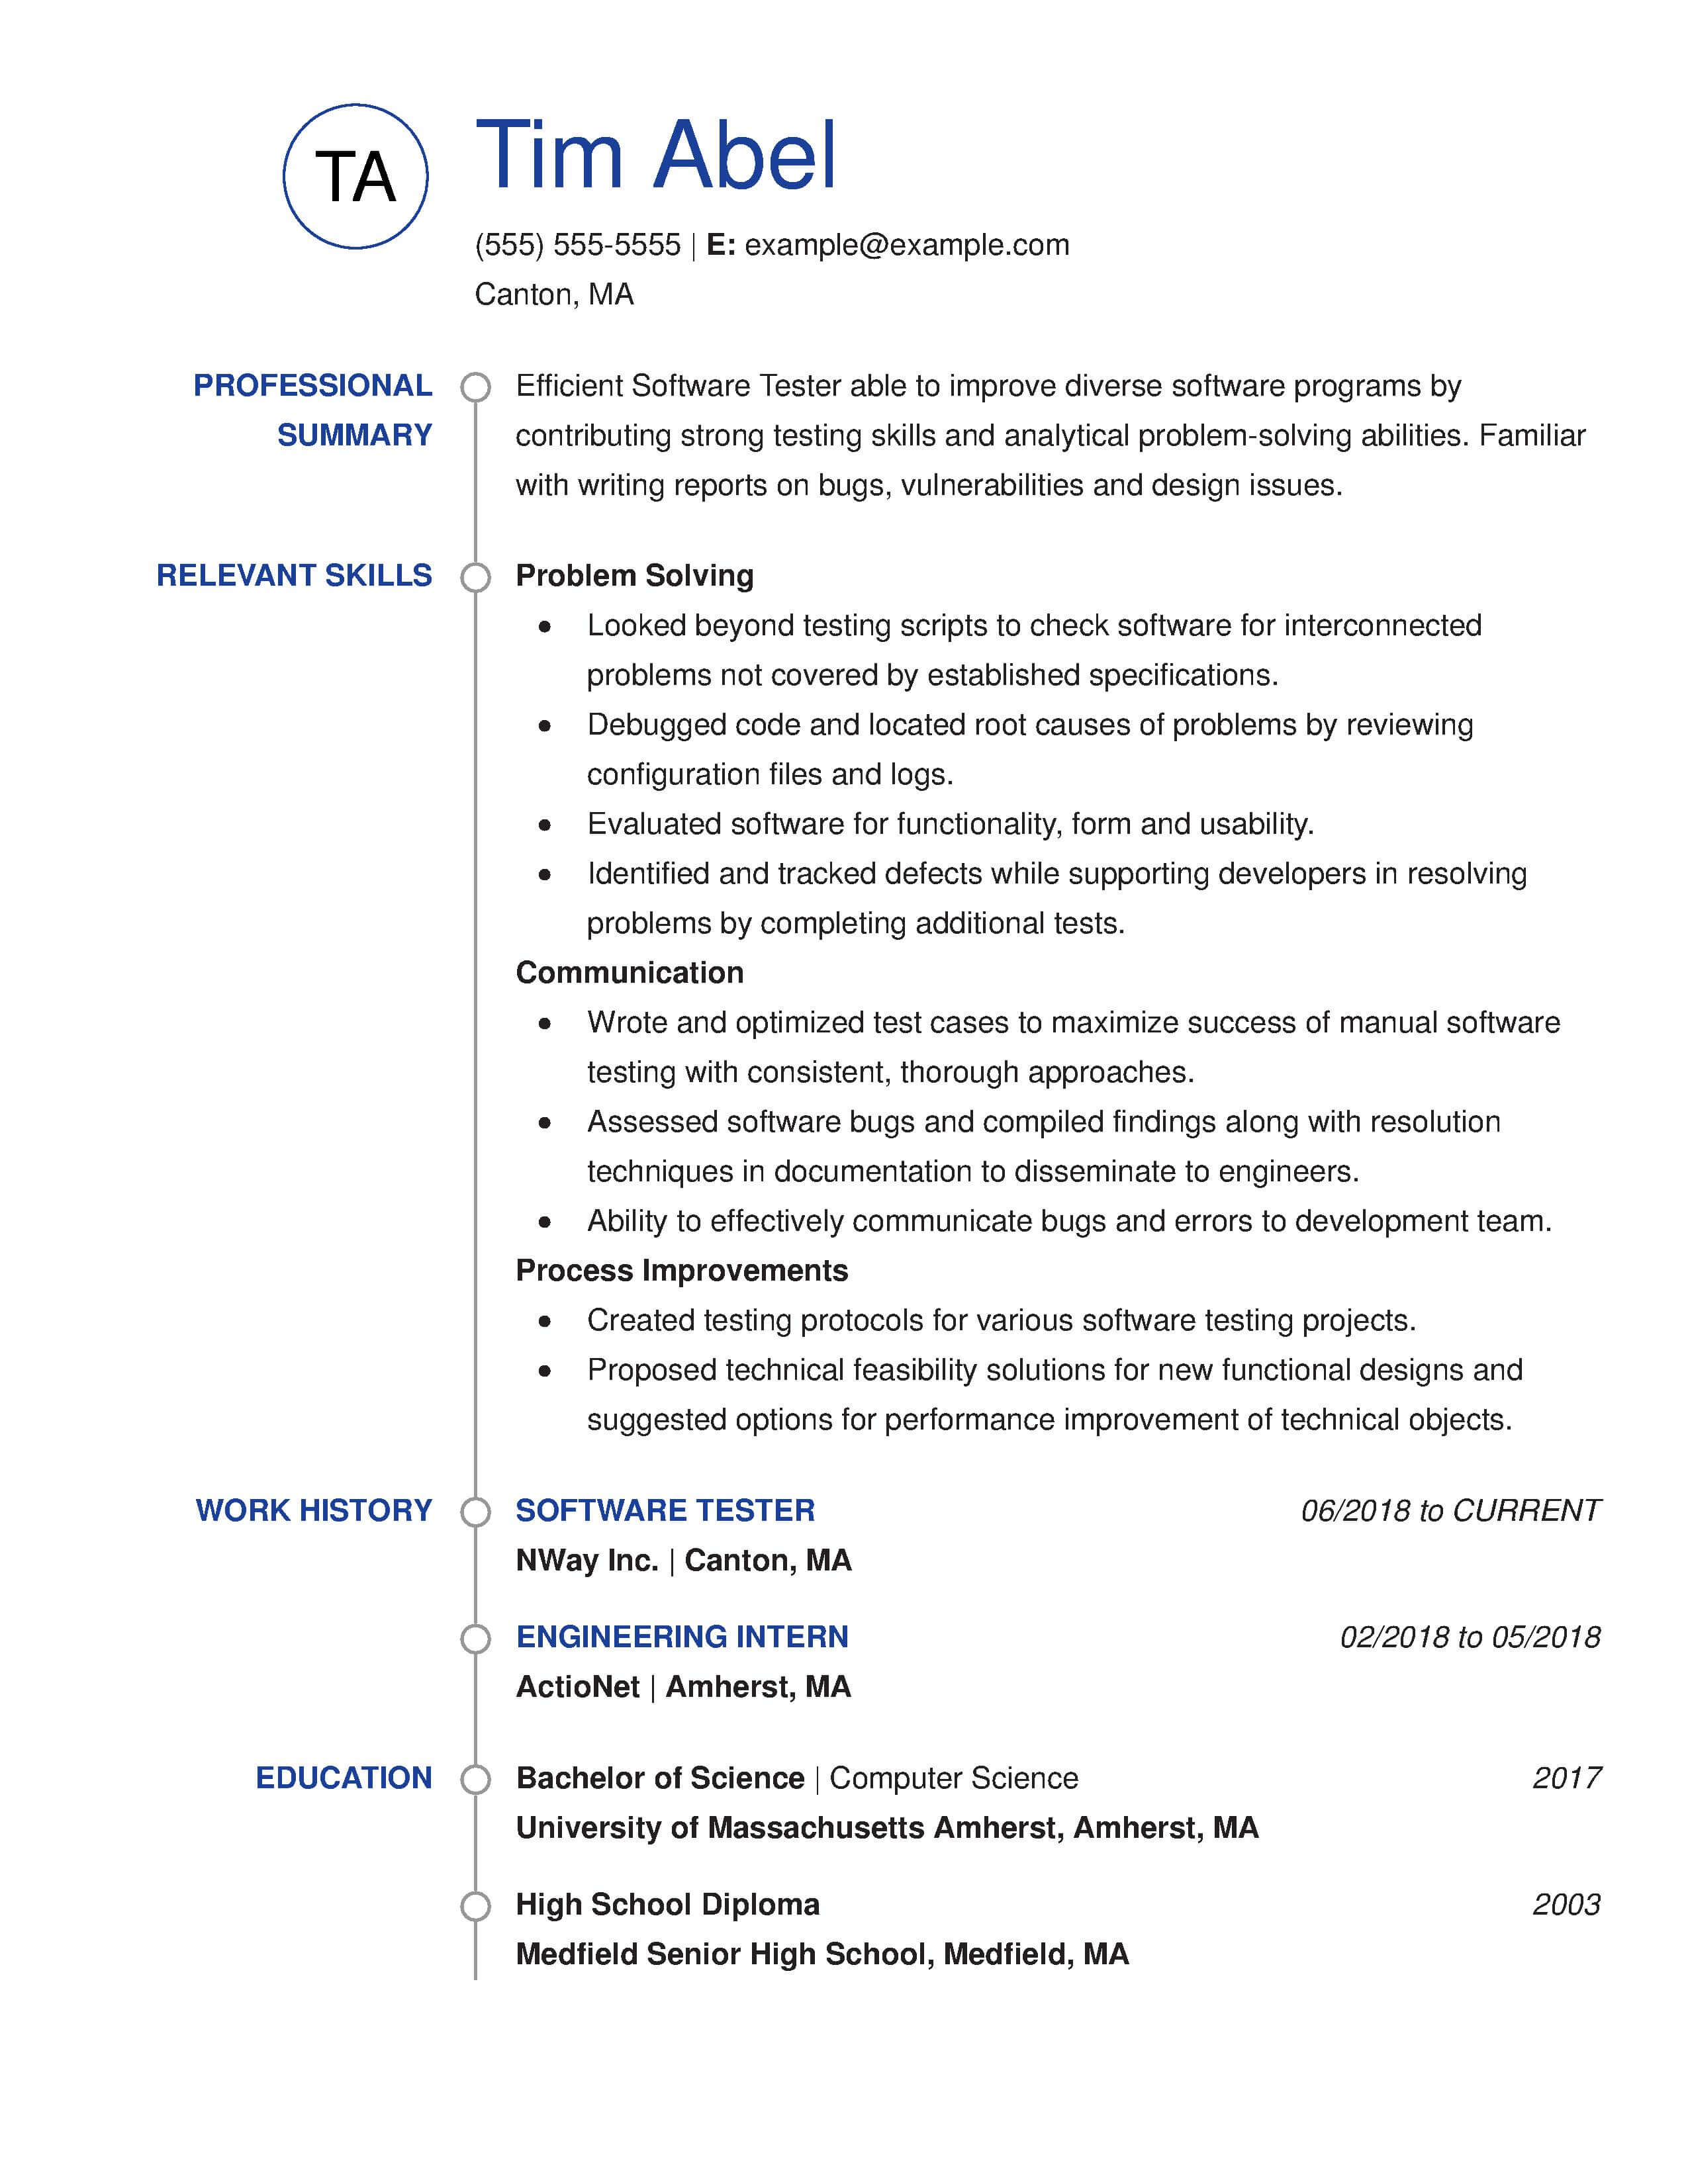 Example Of A Resume Functional Entry Level Software Tester example of a resume|wikiresume.com